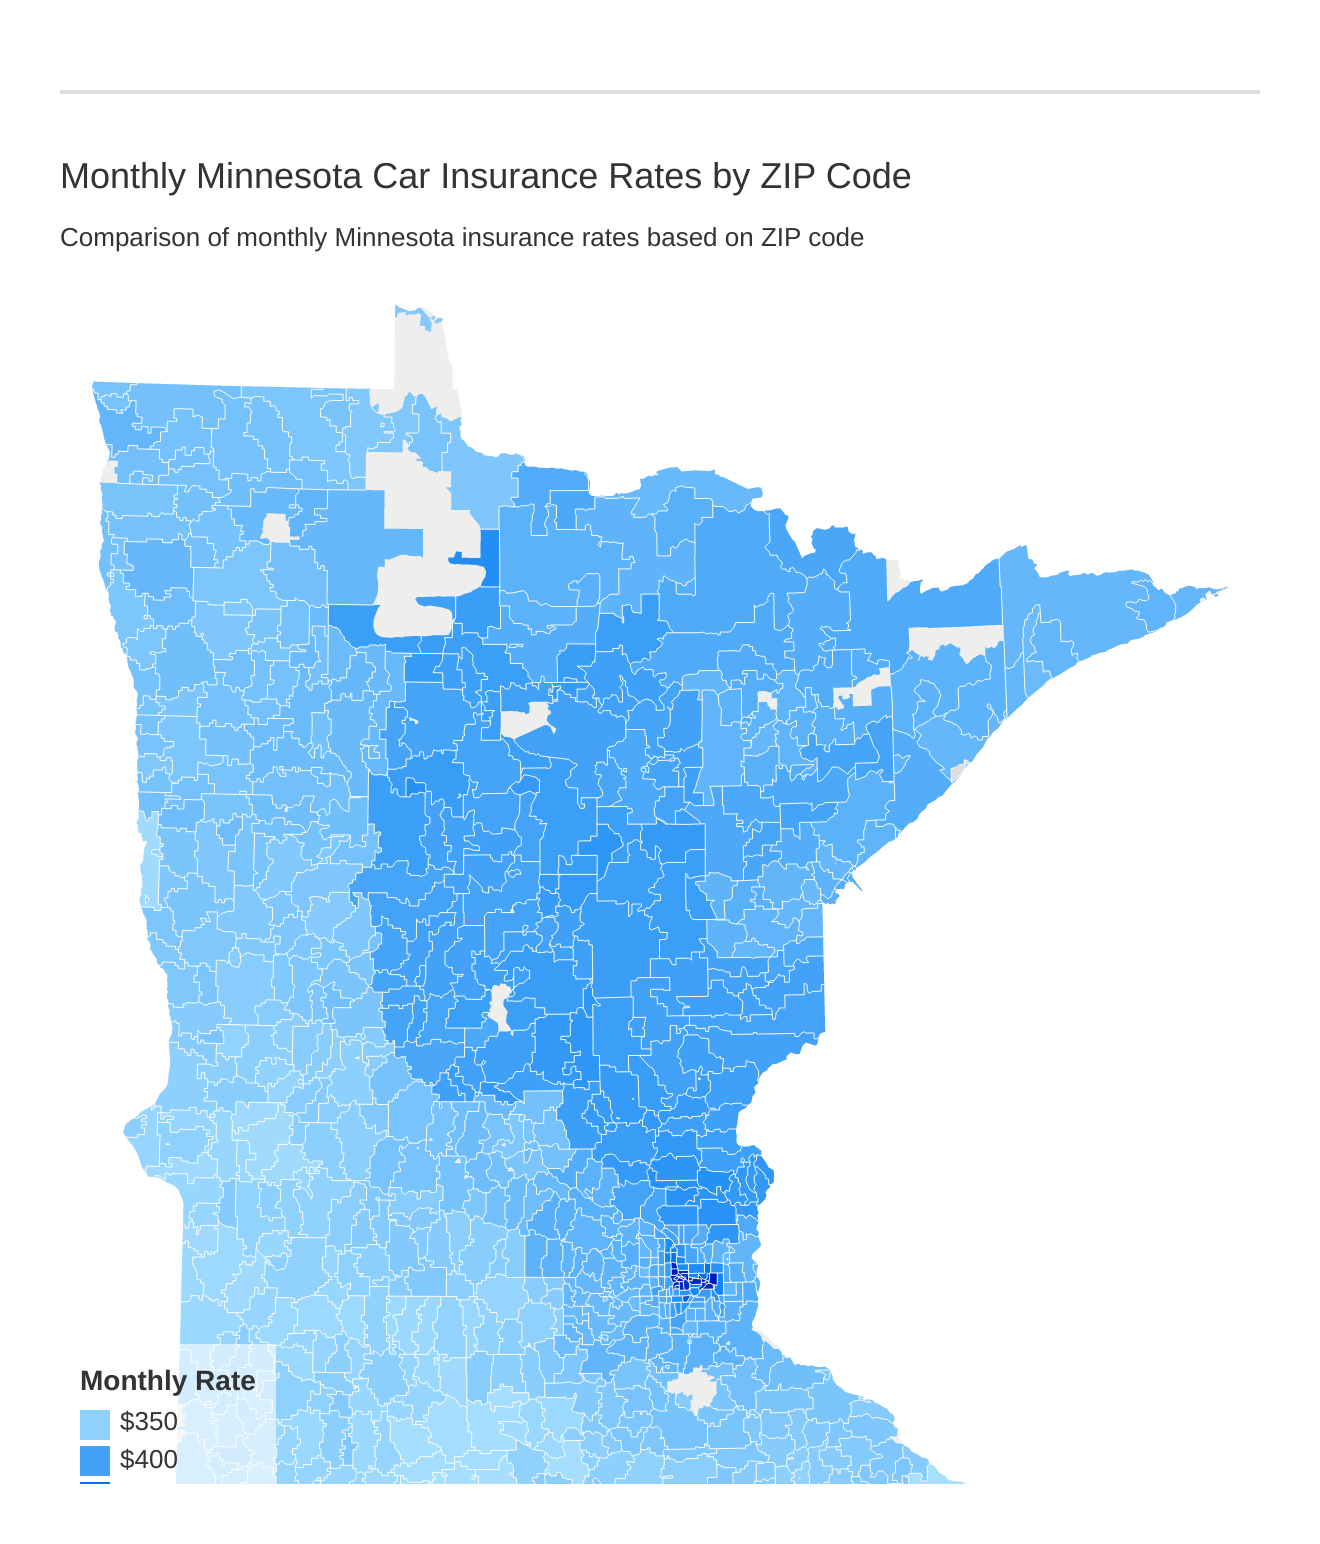 Monthly Minnesota Car Insurance Rates by ZIP Code